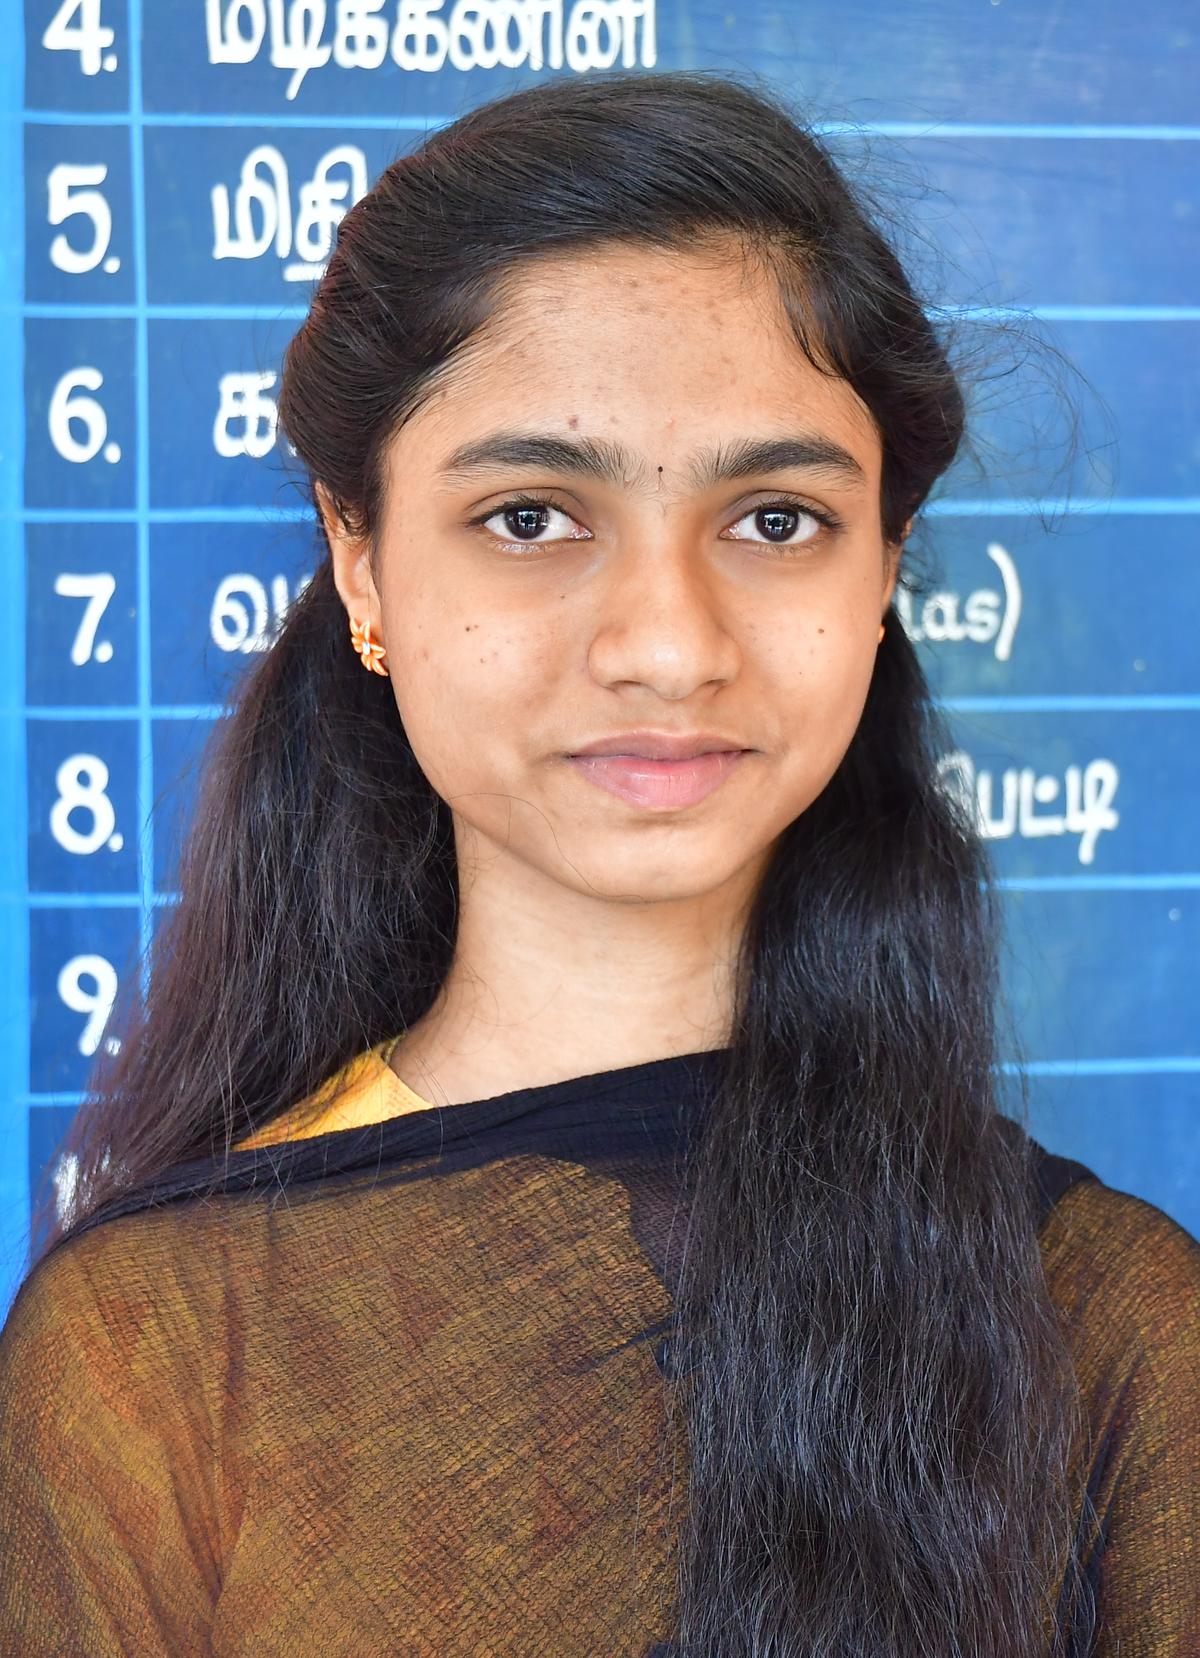 inter-student-record-scored-600-marks-in-results